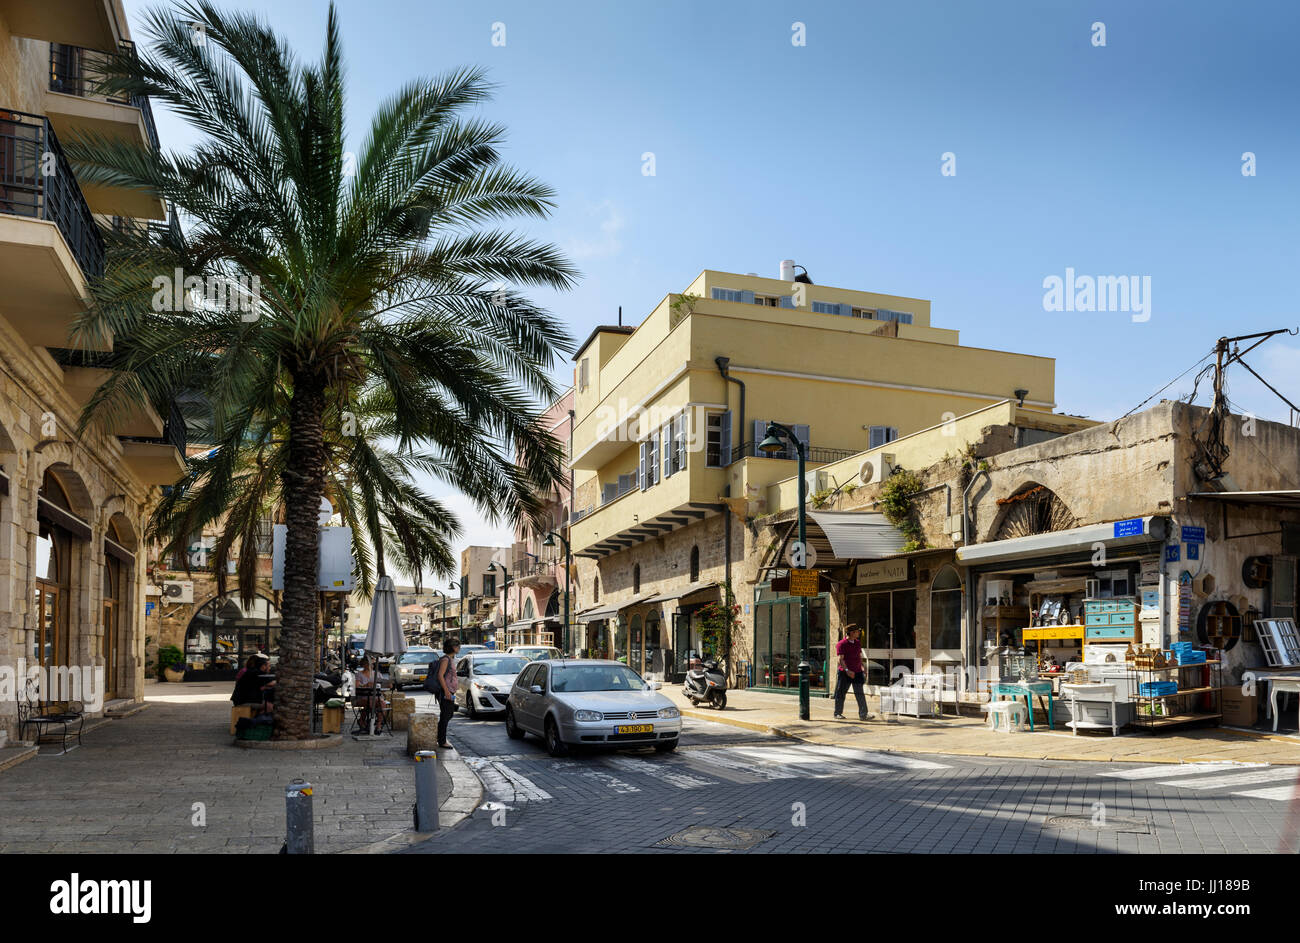 Tel Aviv, Israel : May 04, 2017 : Tel Aviv old district near Jaffa withs small shops and typicals streets bty day. Israel Stock Photo